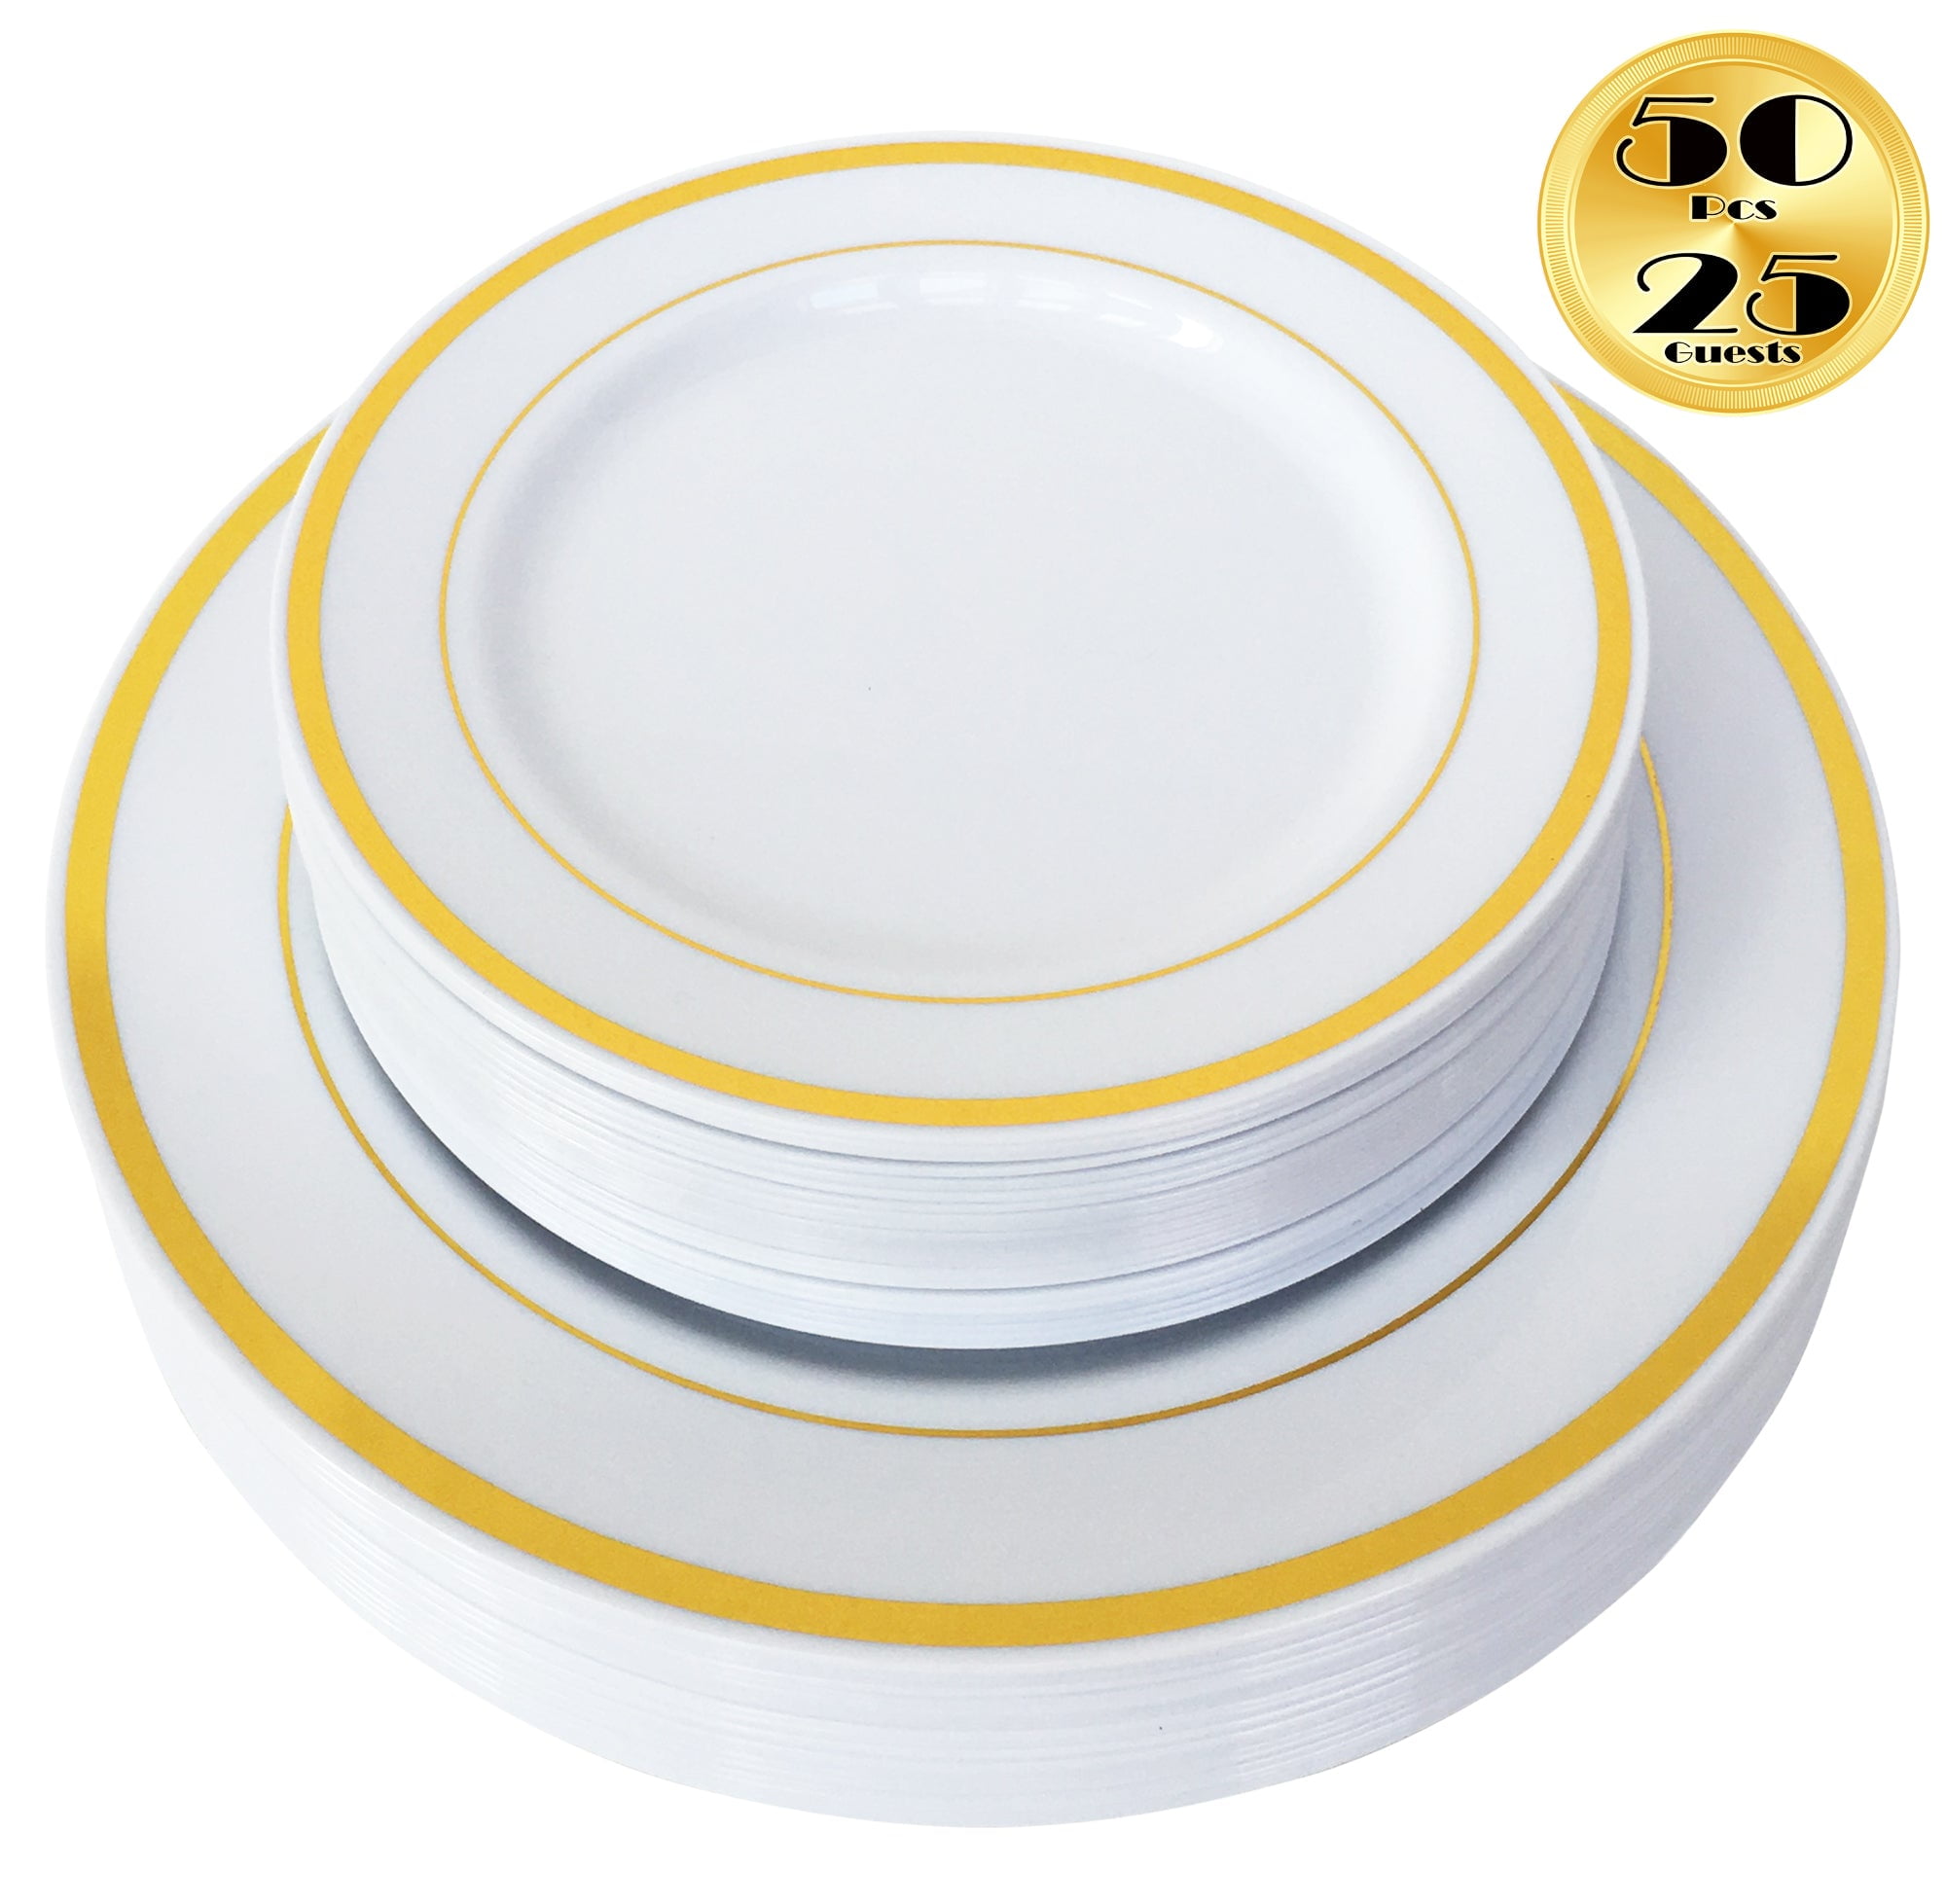 50 Piece Elegant Disposable Plates with Gold Lace Rim Set Includes 25 Dinner Plates and 25 Salad Plates Fancy Plates for Weddings and Parties Heavy Duty Plastic Dinnerware Gold Lace 